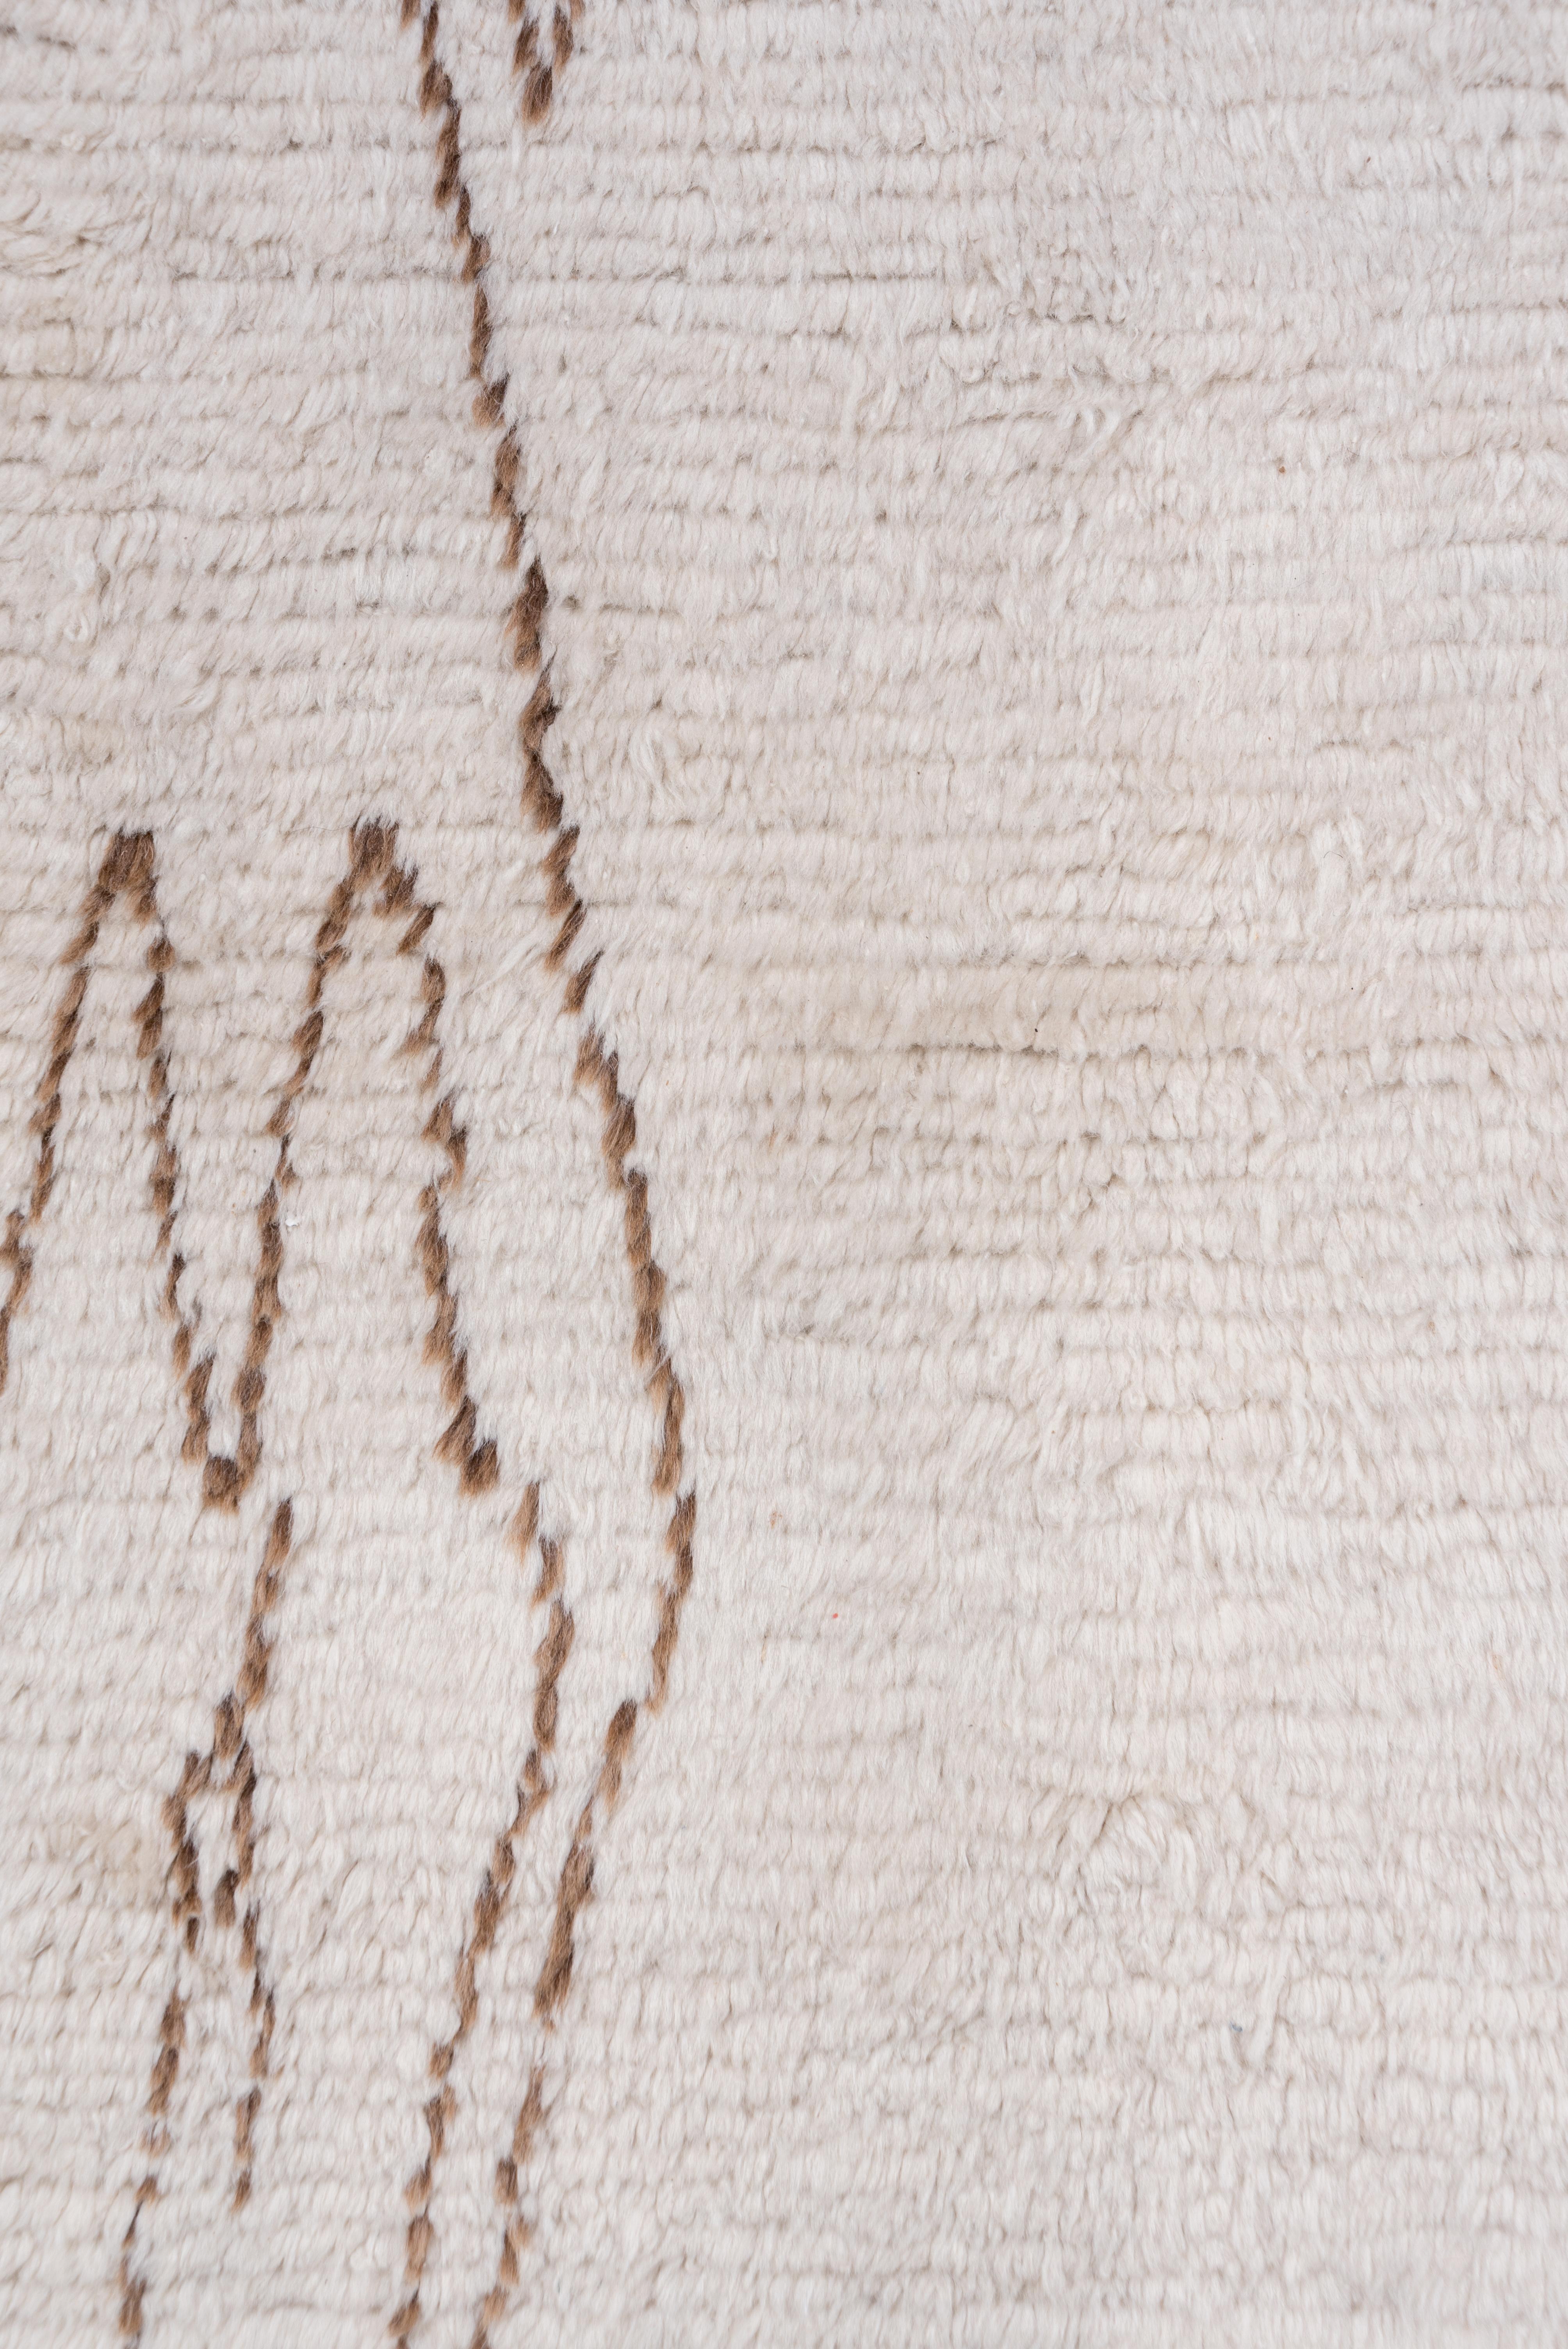 This borderless High Atlas runner has a medium-long recumbent pile in creamy ivory undyed wool and a geometric pattern in medium brown of tall, conjoint lozenges, and various tall open motives scattered irregularly with much of the center open and